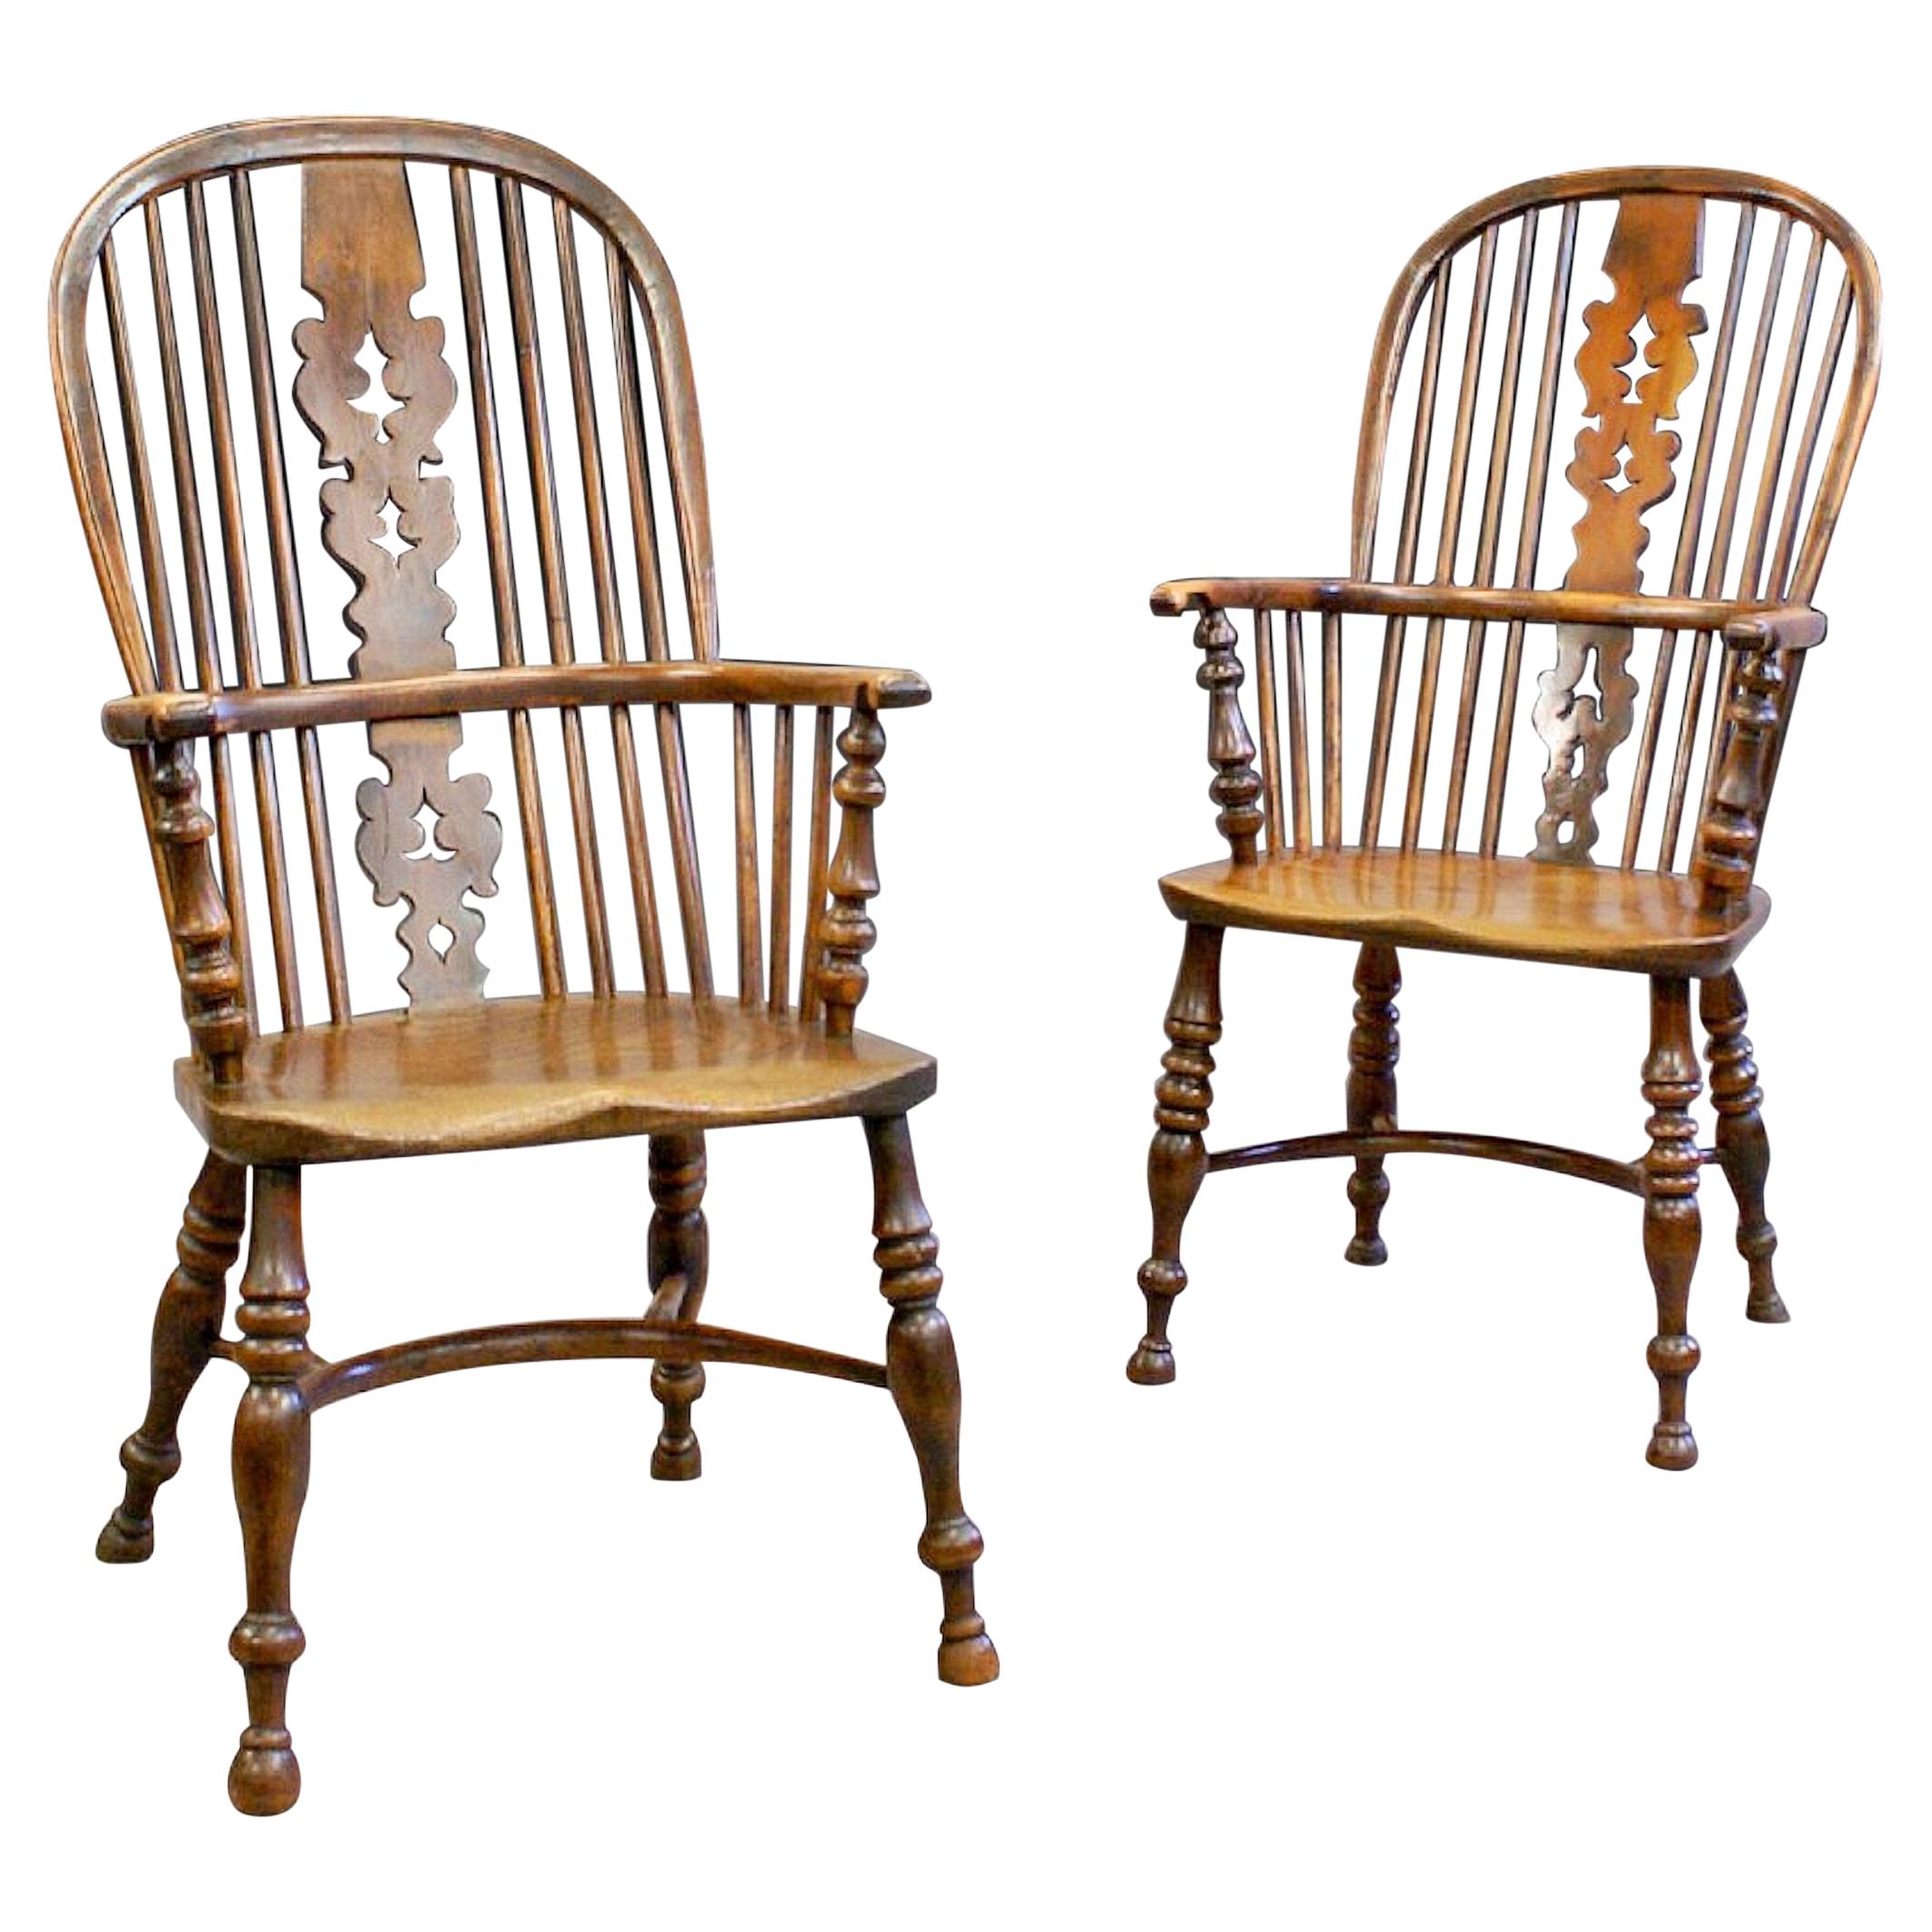 Matched Pair of Yew Wood Arm Chairs